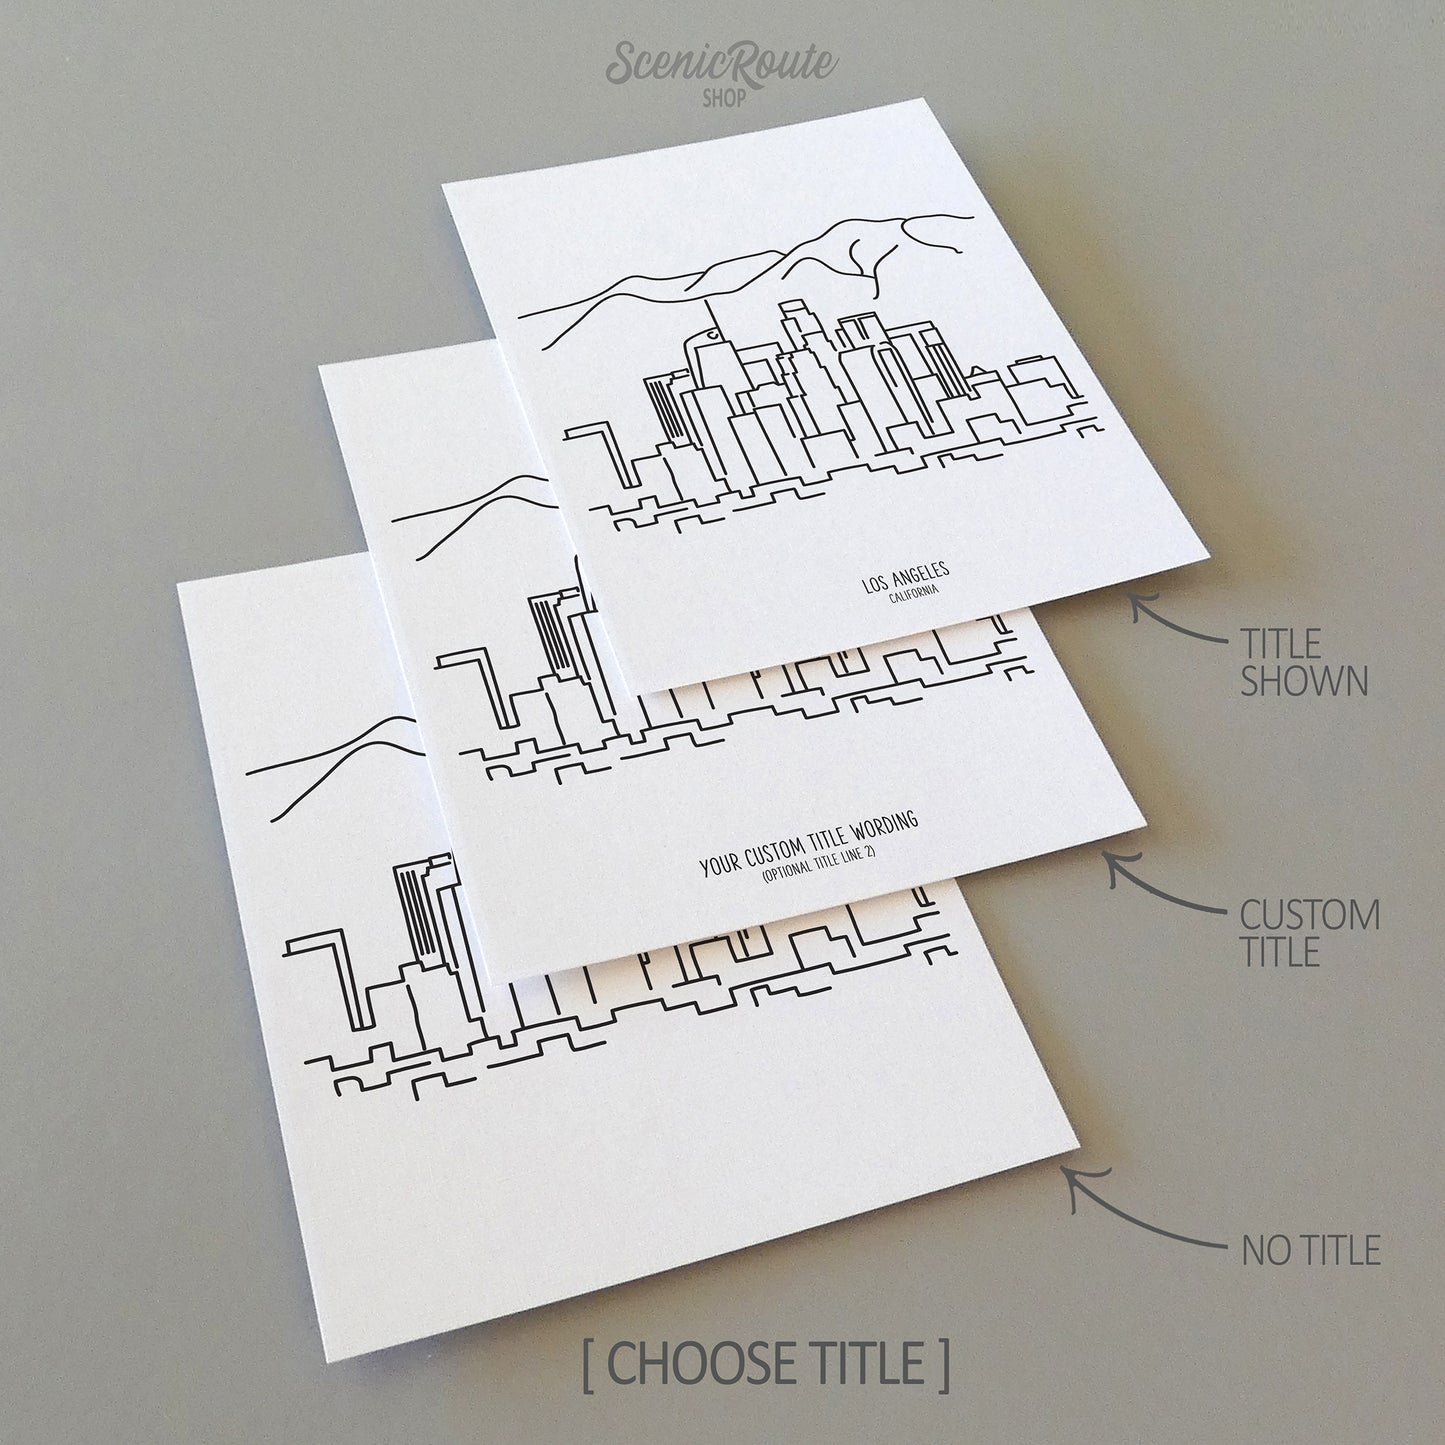 Three line art drawings of the Los Angeles California Skyline on white linen paper with a gray background. The pieces are shown with title options that can be chosen and personalized.